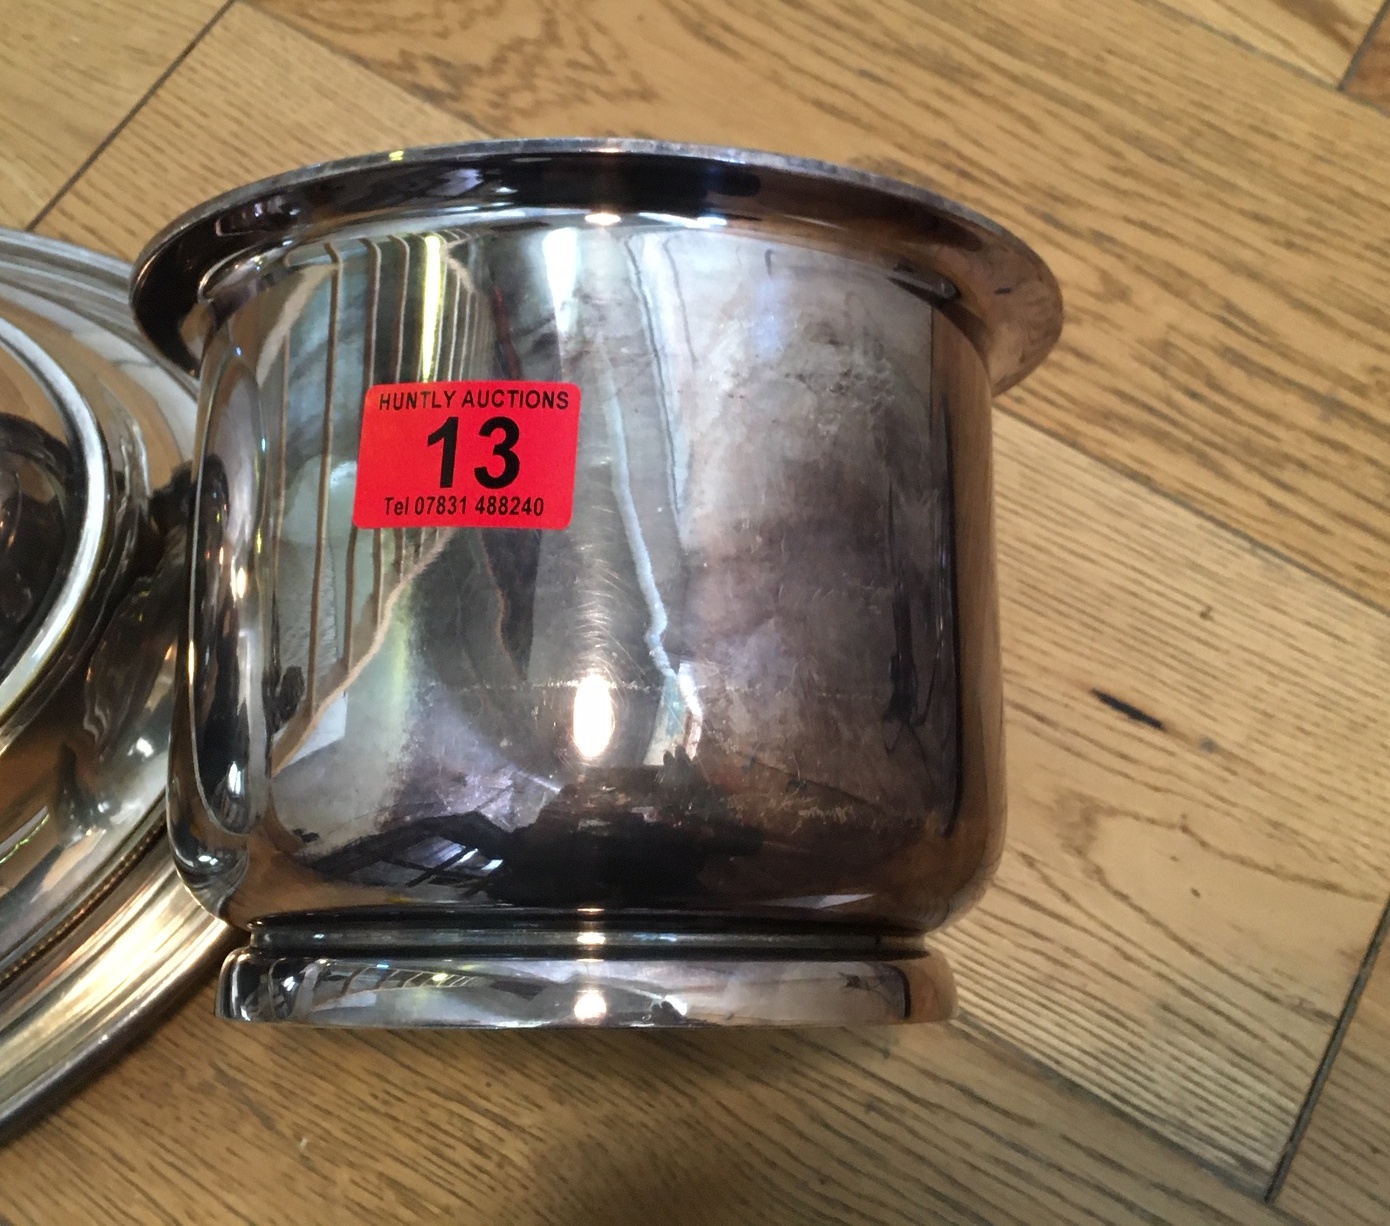 Lot of 3 Items of Silver Plate - Meat Platter/Cover-Ice Bucket and Sauce Server. - Image 4 of 9